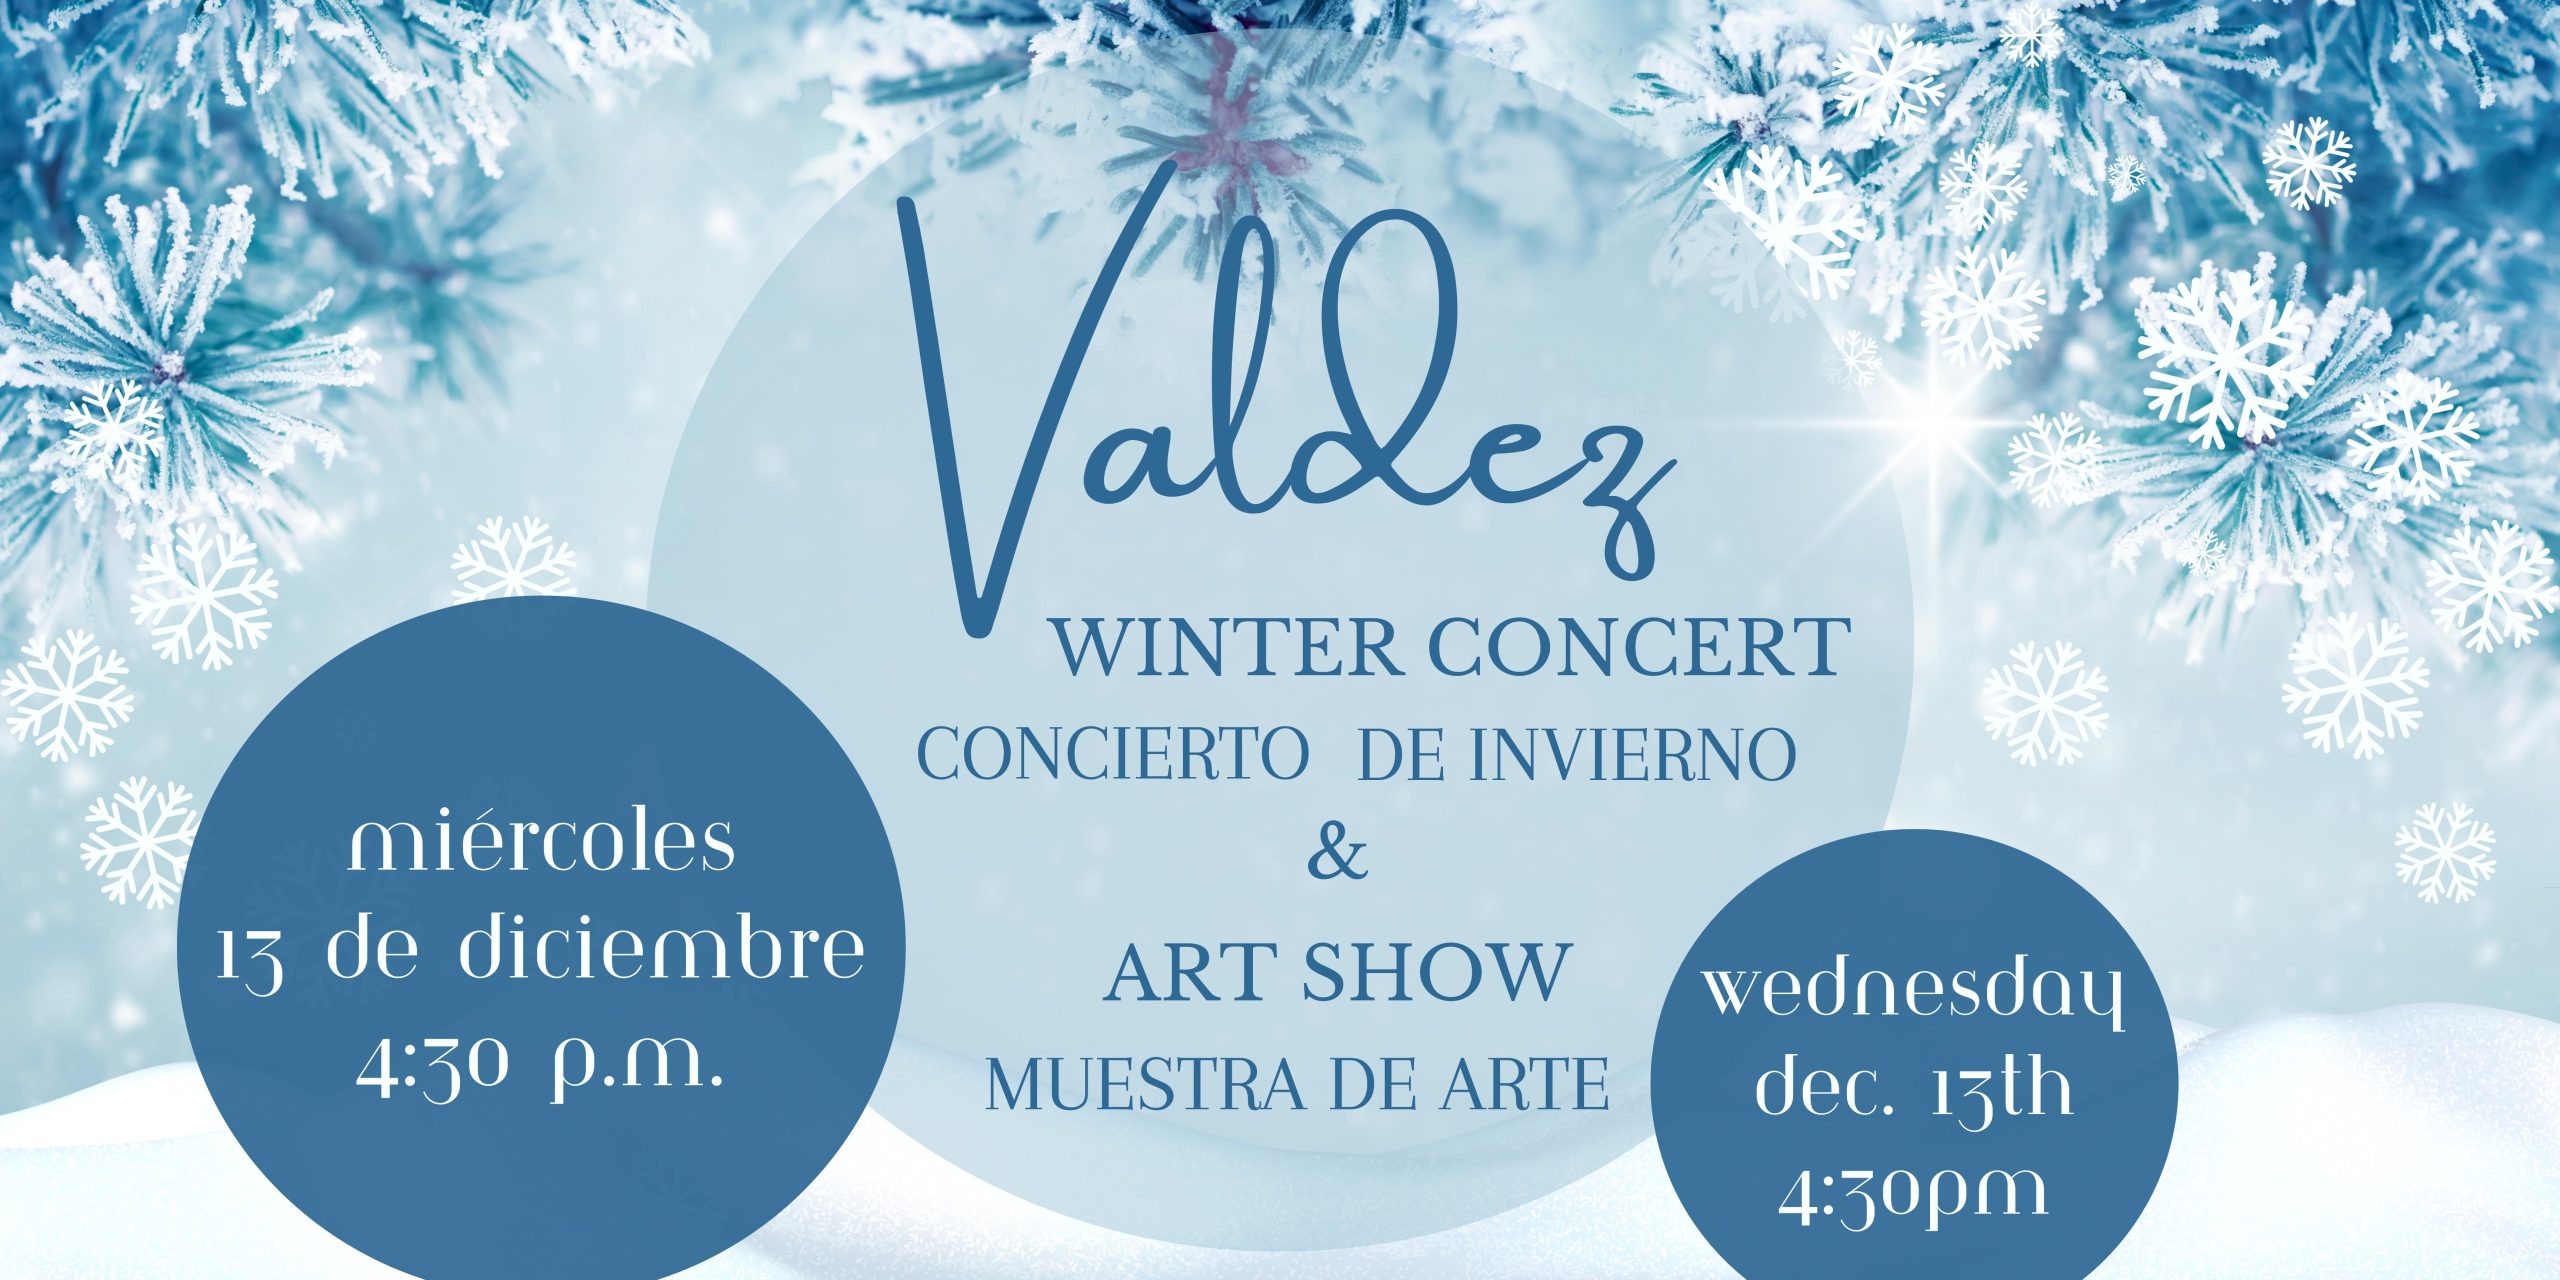 Light blue background with dark blue tinted fir tree branches at top corners and white snowflakes throughout. Light blue ball in the center with dark blue text says, "Valdez Winter Concert & Art Show." On left, smaller dark blue ball with white text says, "Wednesday, Dec 13, 4:30pm."